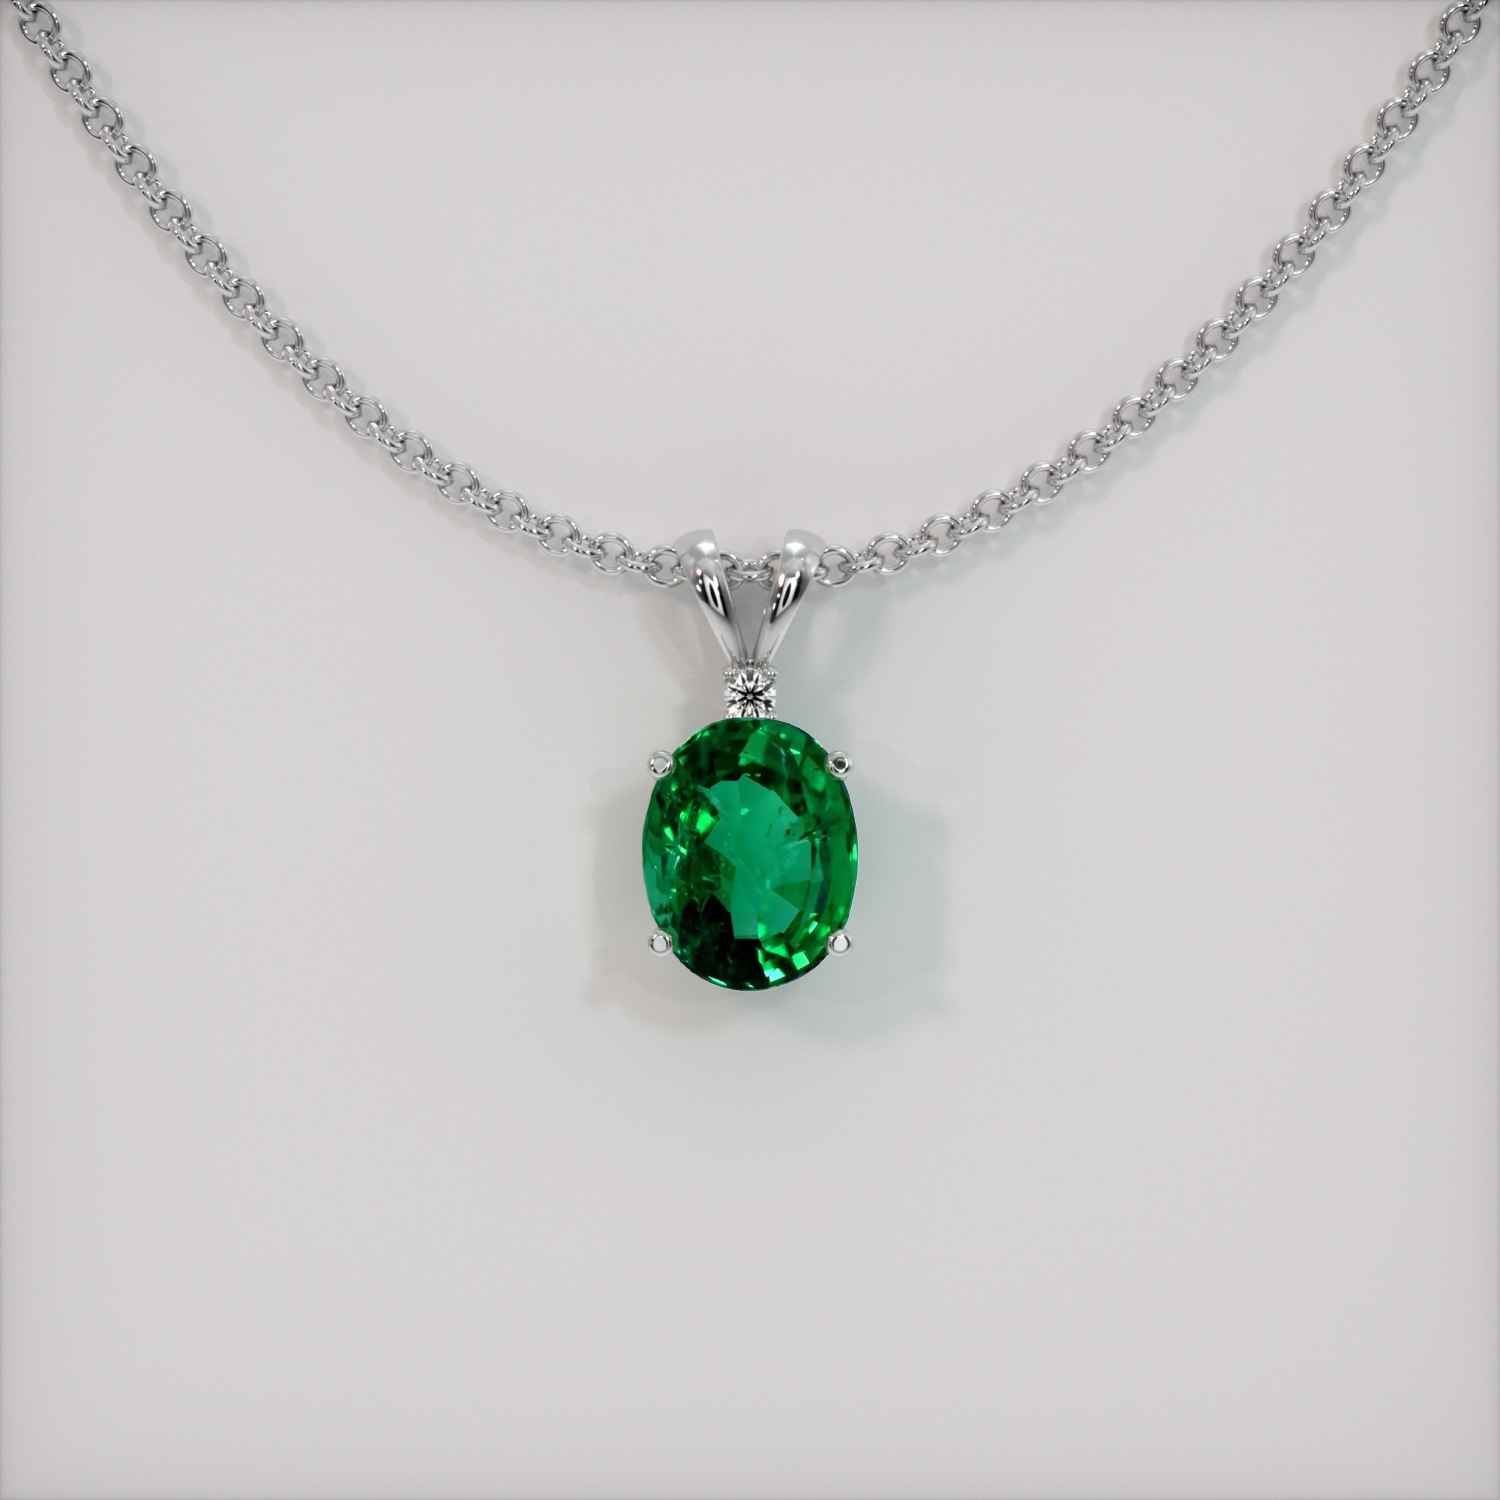 1/2 Carat (Ctw) Lab-Created Drop Emerald Pendant Necklace in 10K White Gold  with Chain - Walmart.com